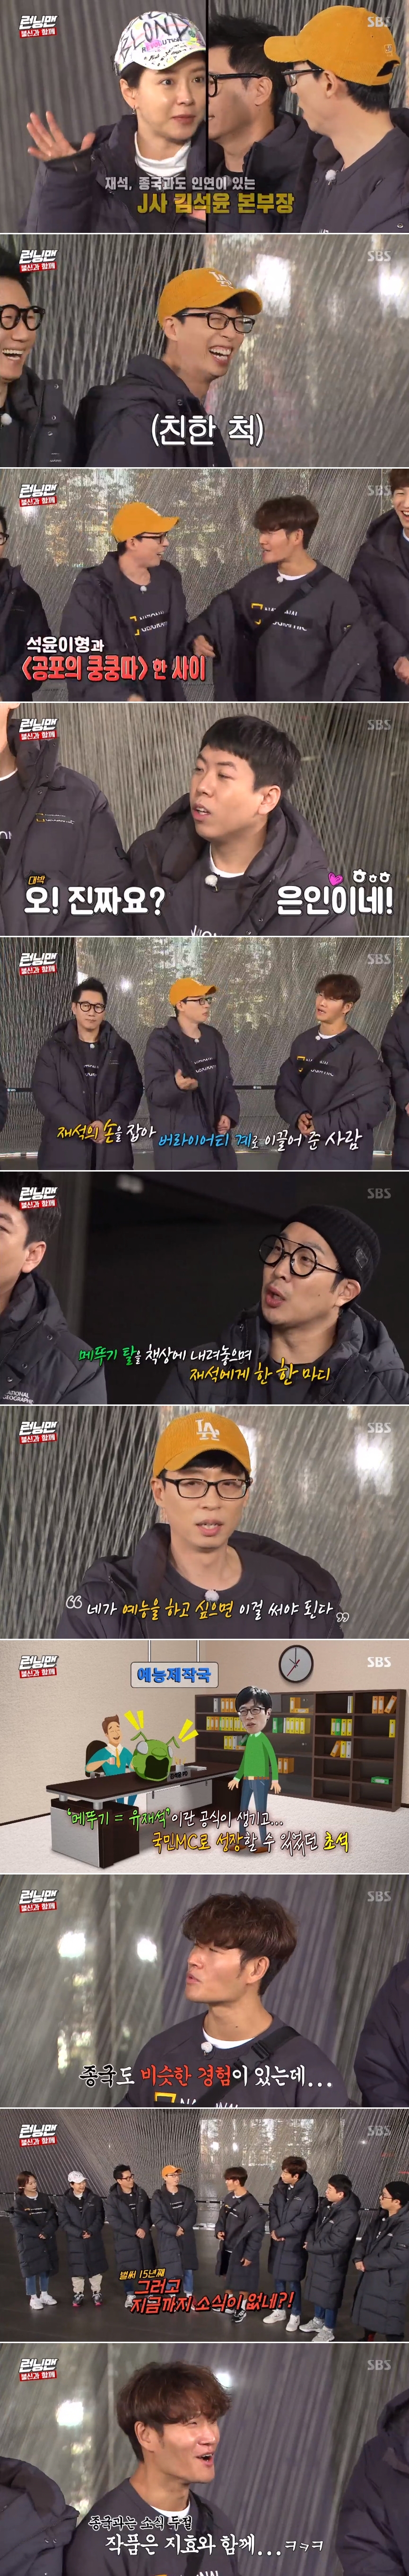 Seoul = = = Kim Seok-yoon CP, Yoo Jae-Suk, showed gratitude for CP.In the SBS entertainment program Running Man broadcasted on the afternoon of the afternoon, Yoo Jae-Suk named Kim Seak-yoon CP as the person who led him to this place.On this day, the members mentioned Kim Seak-yoon CP, a new director, while talking about the current situation of Song Ji Hyo.Yoo Jae-Suk said, I was originally an entertainer, and for the first time I was the one who made me use the Caelifera mask. He said, When no one held my hand, I grabbed my hand.If you want to perform, you have to do this. Kim Seak-yoon CP made me this far. Kim Jong Kook said, When you were a man, you said, You have to act. So far, I have not heard. I have to act every time I see it.